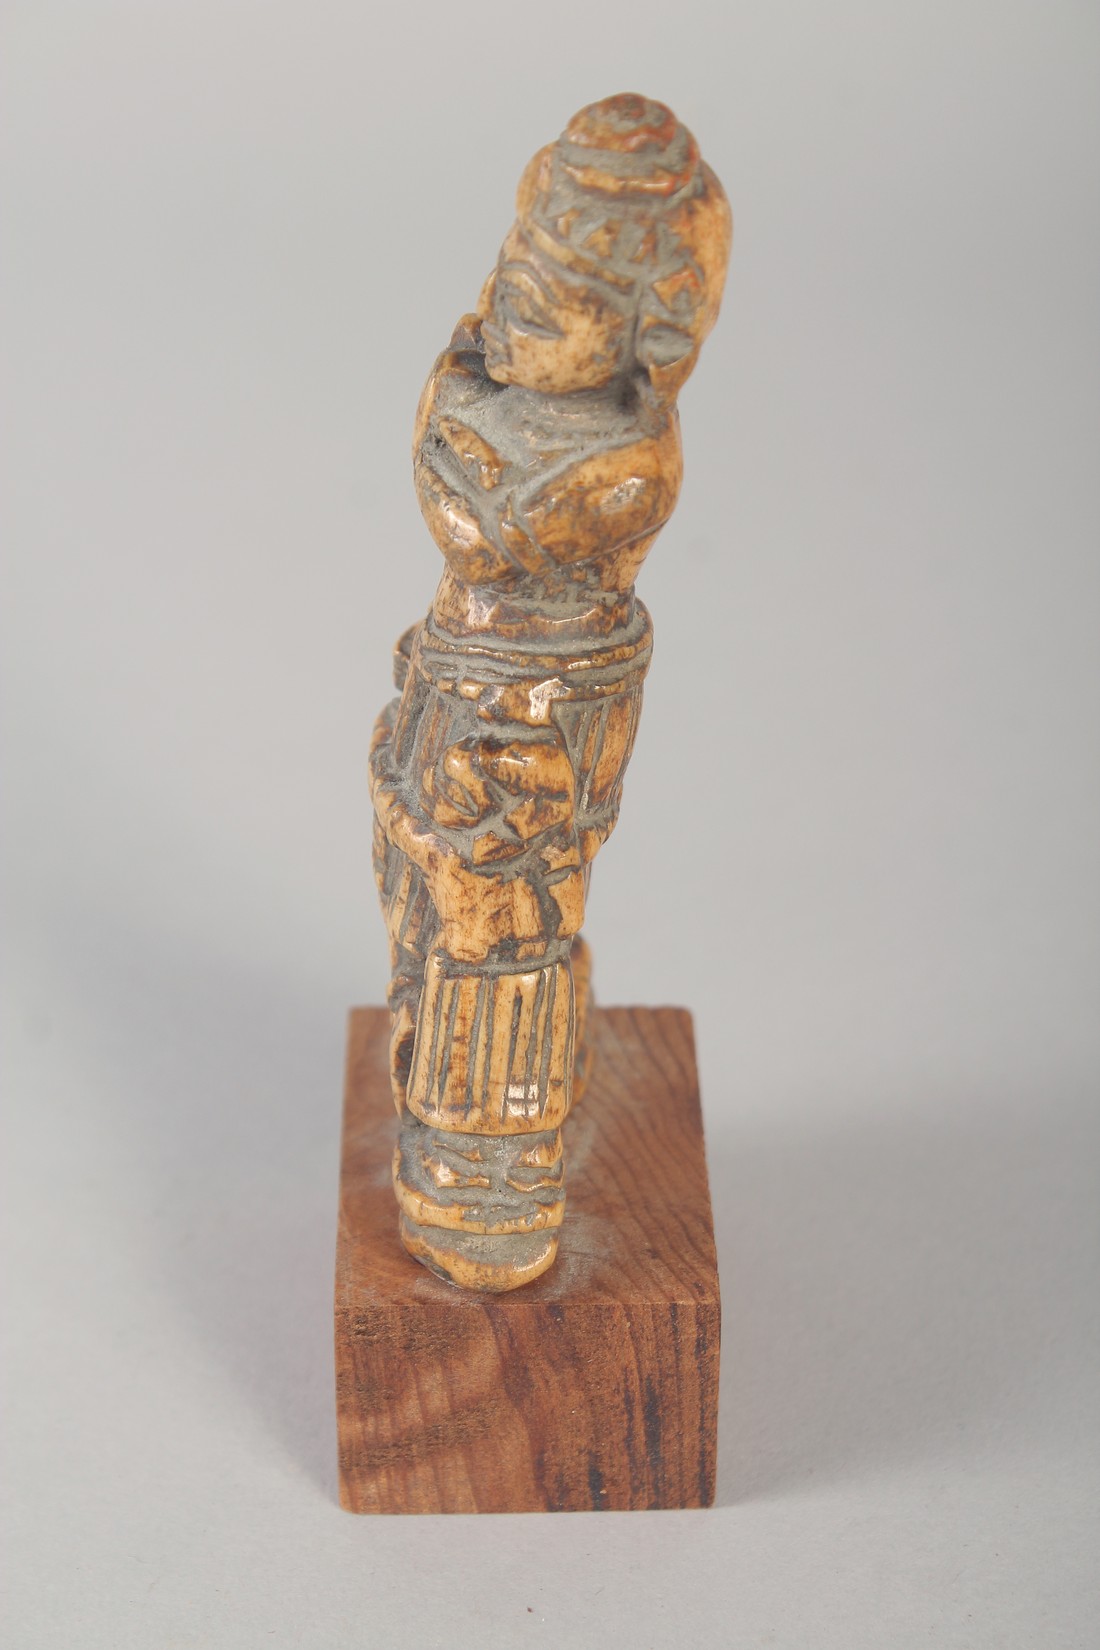 A 17TH CENTURY SOUTH INDIAN CARVED BONE FIGURE of fluting Krishna, mounted to a wooden base, carving - Image 2 of 4